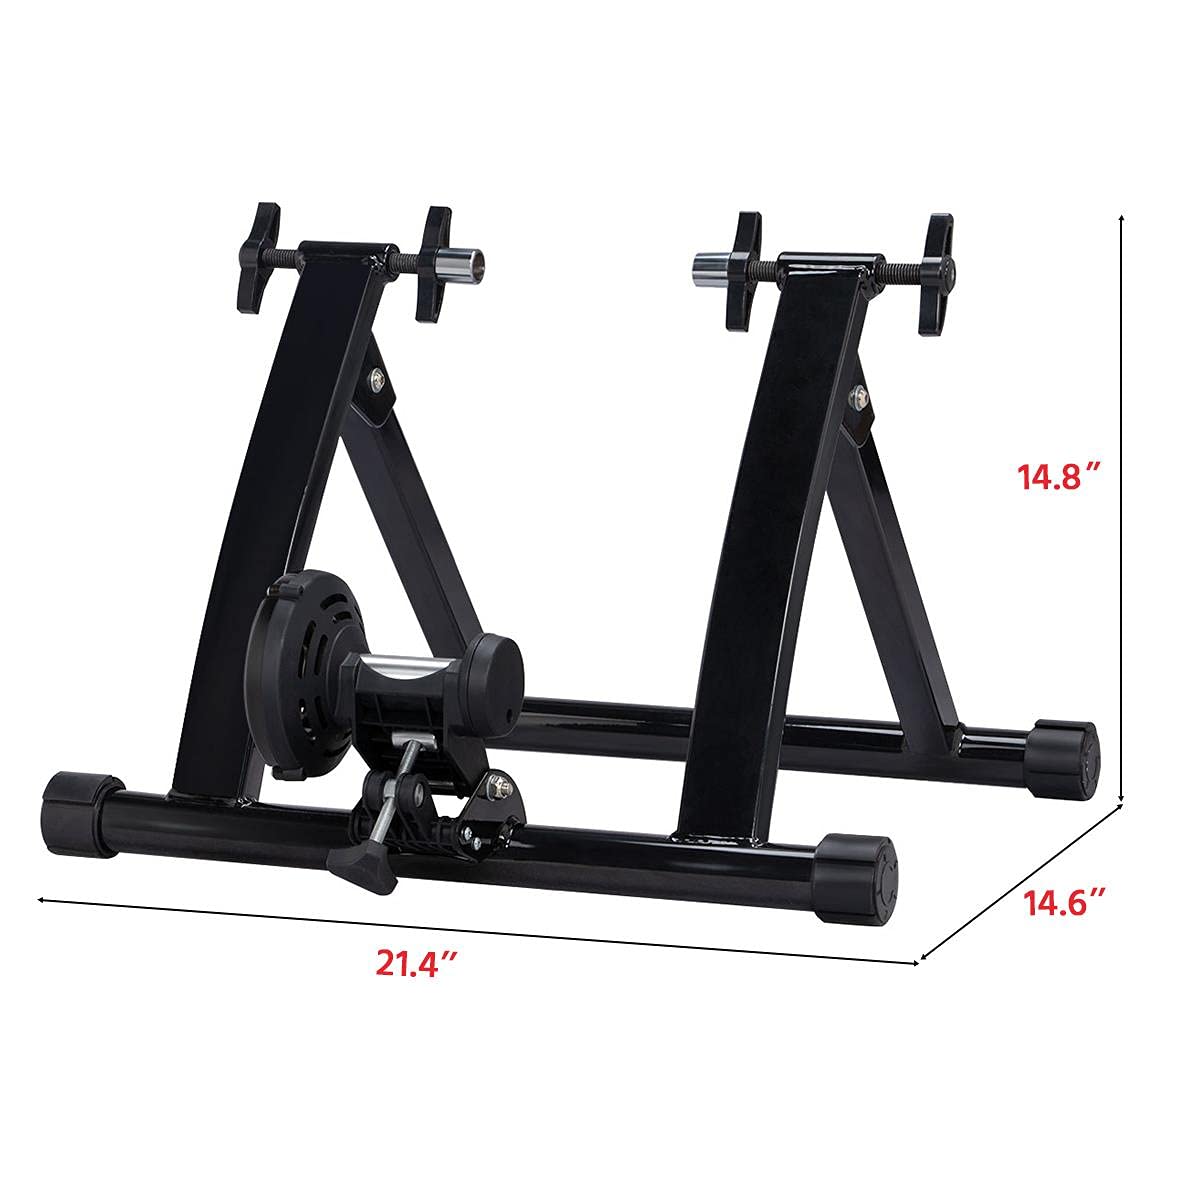 Yaheetech Magnetic Bike Trainer Stand Premium Steel Bike Bicycle Indoor Exercise Bike Stationary Workout Trainer Stand Fits for 26in-28in